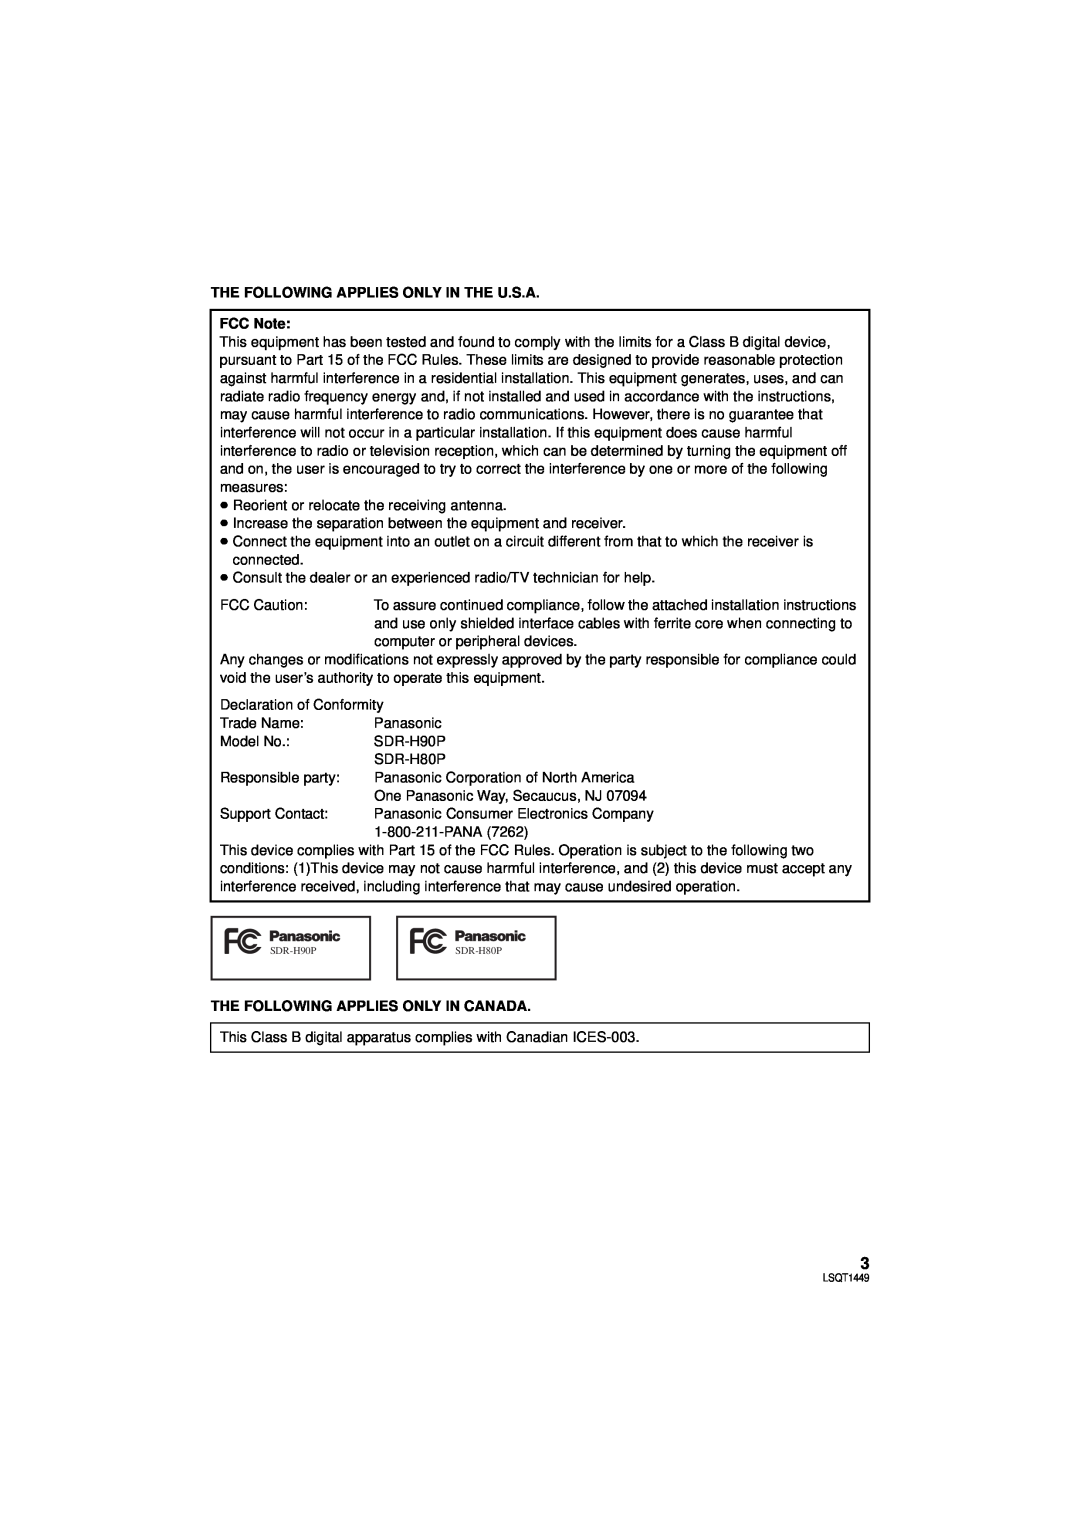 Panasonic SDR-H80PC, SDR-H90P THE FOLLOWING APPLIES ONLY IN THE U.S.A FCC Note, The Following Applies Only In Canada 